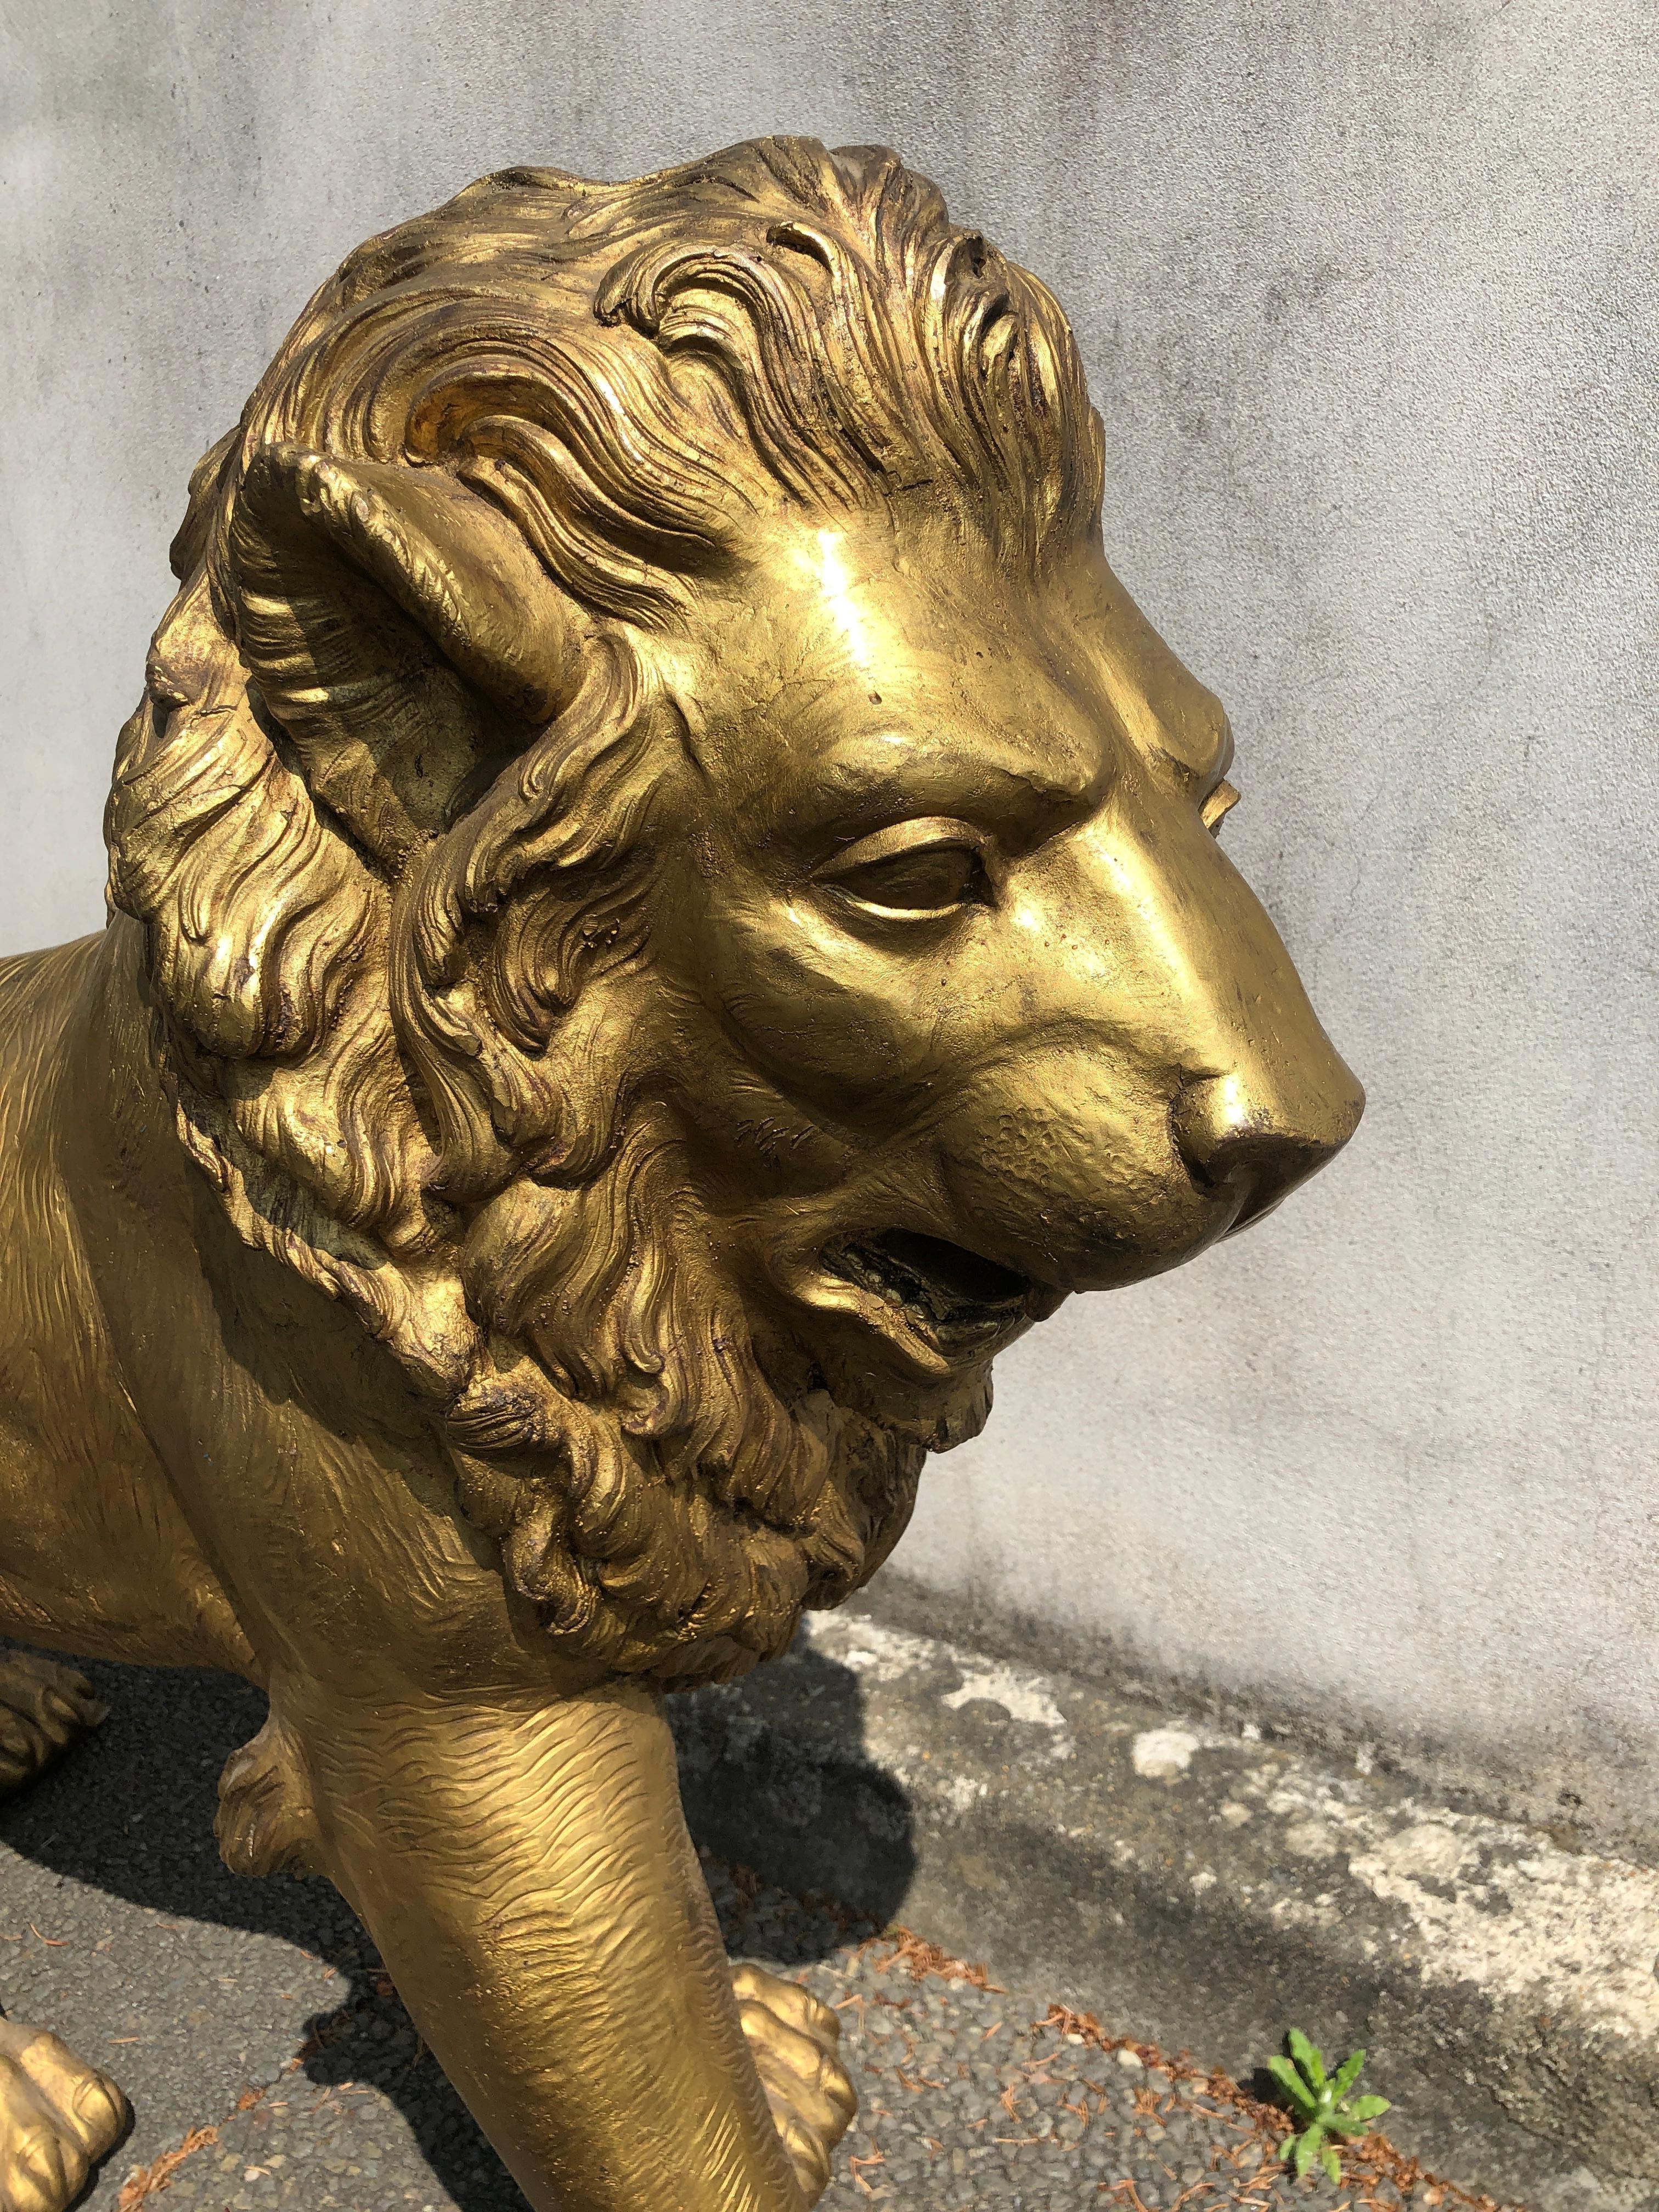 20th Century Golden Bronze Animal Sculpture Representing a Lion from Paris from 1940s